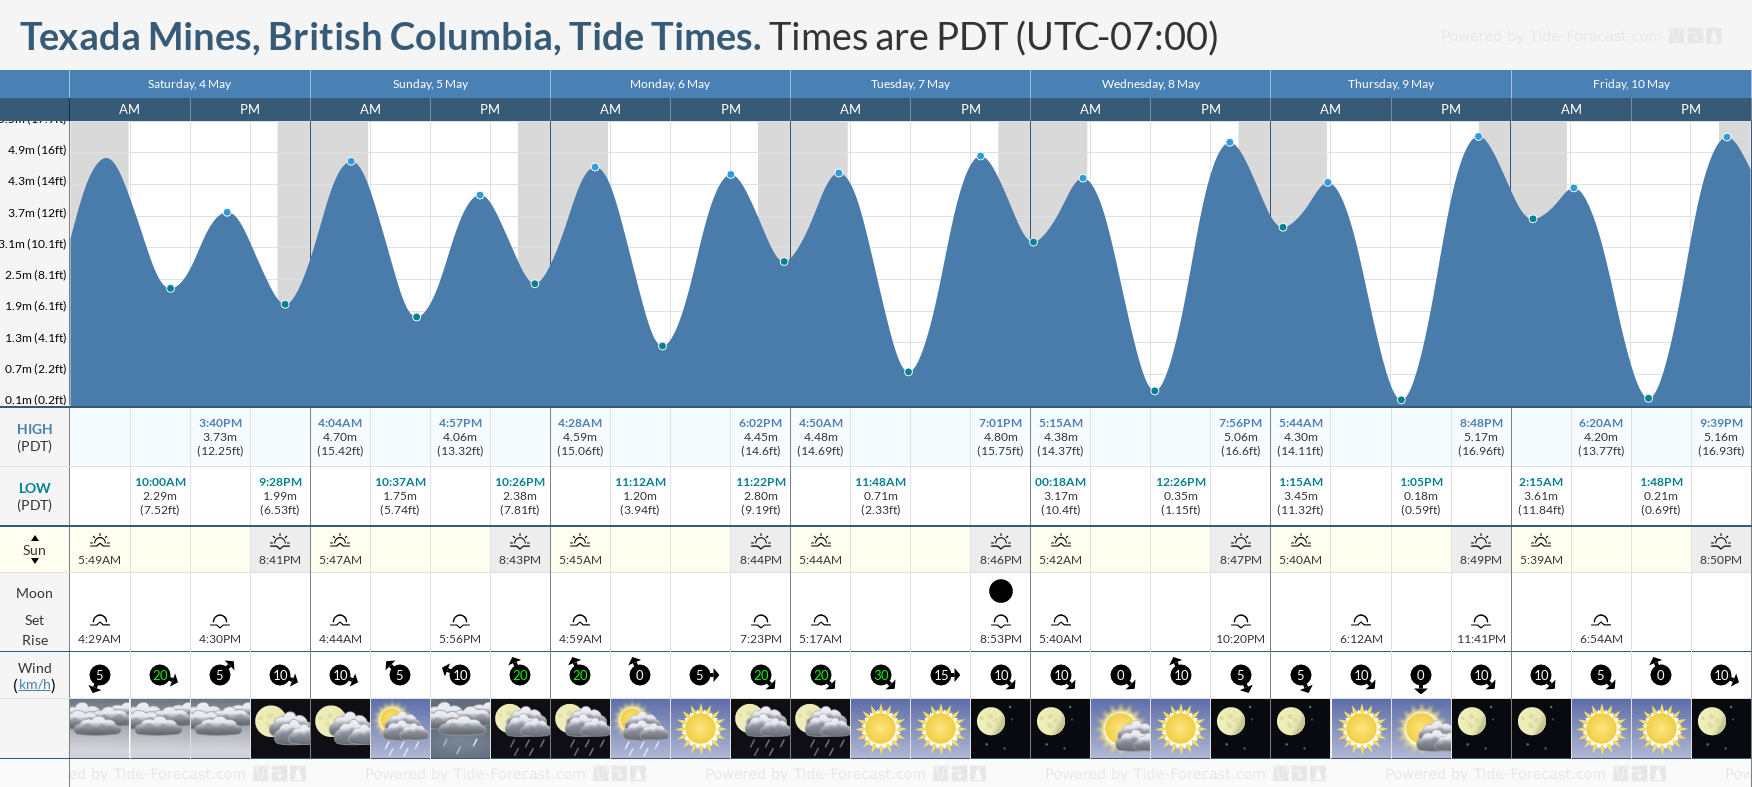 Texada Mines, British Columbia Tide Chart including high and low tide tide times for the next 7 days